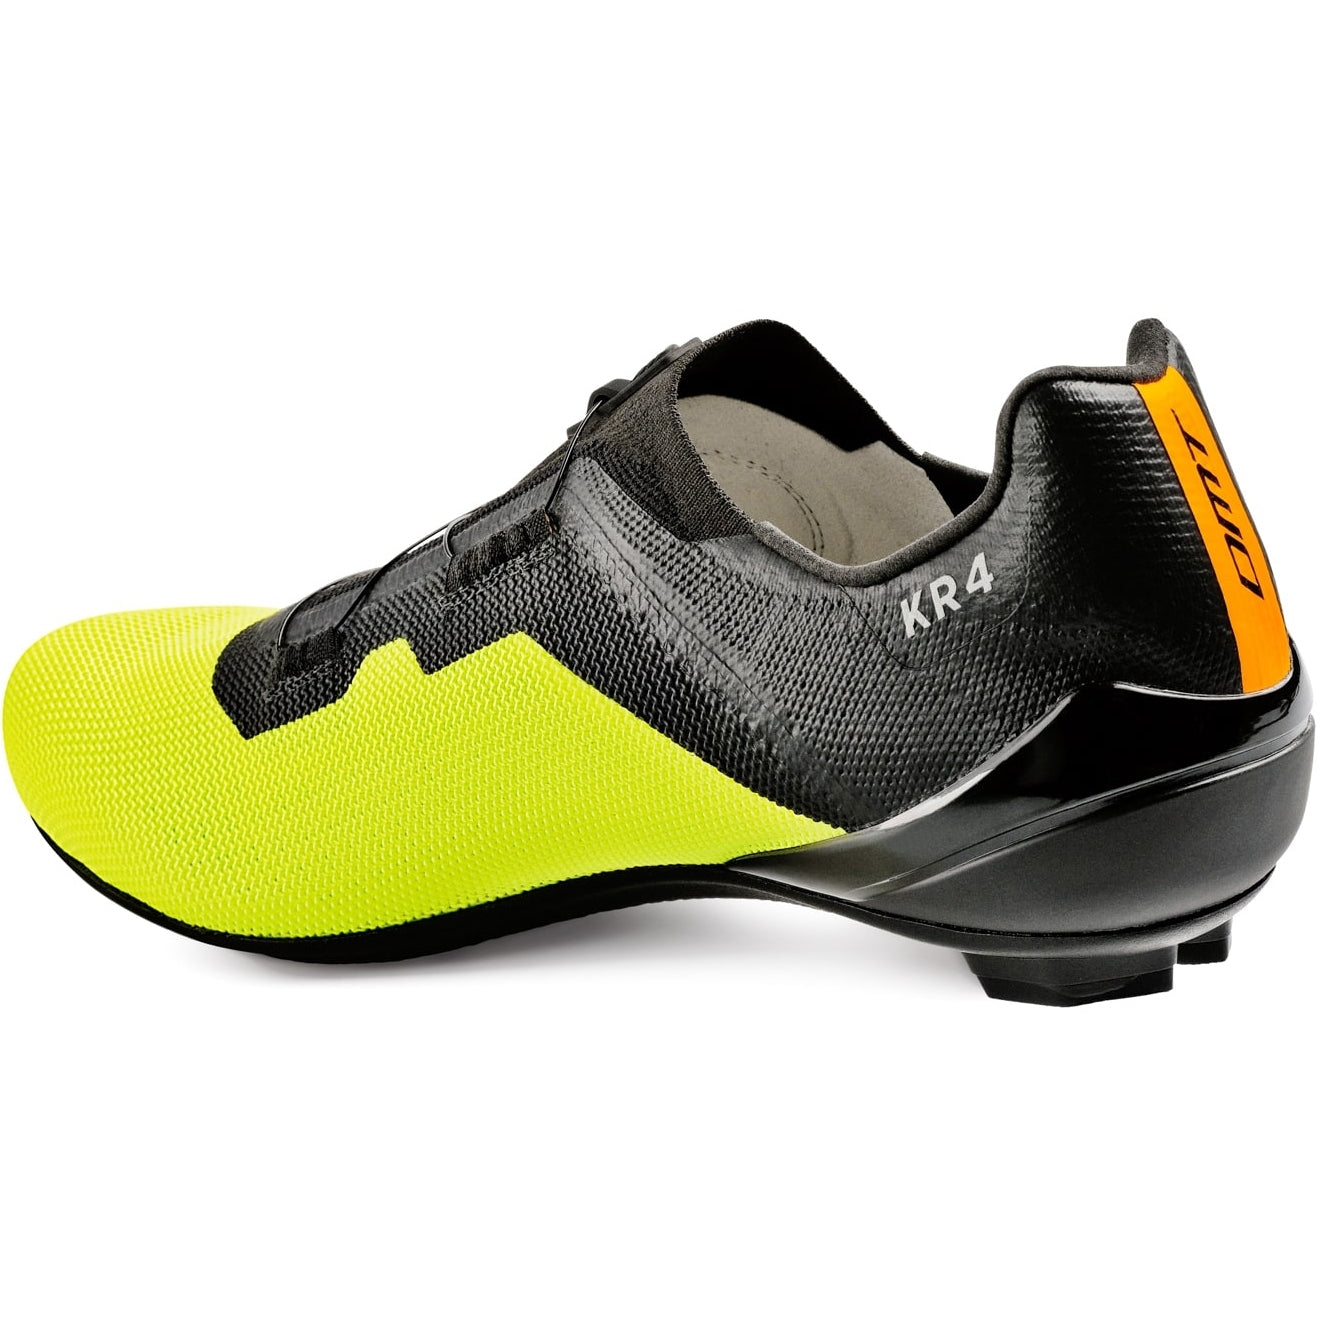 DMT KR4 Road Cycling Shoes